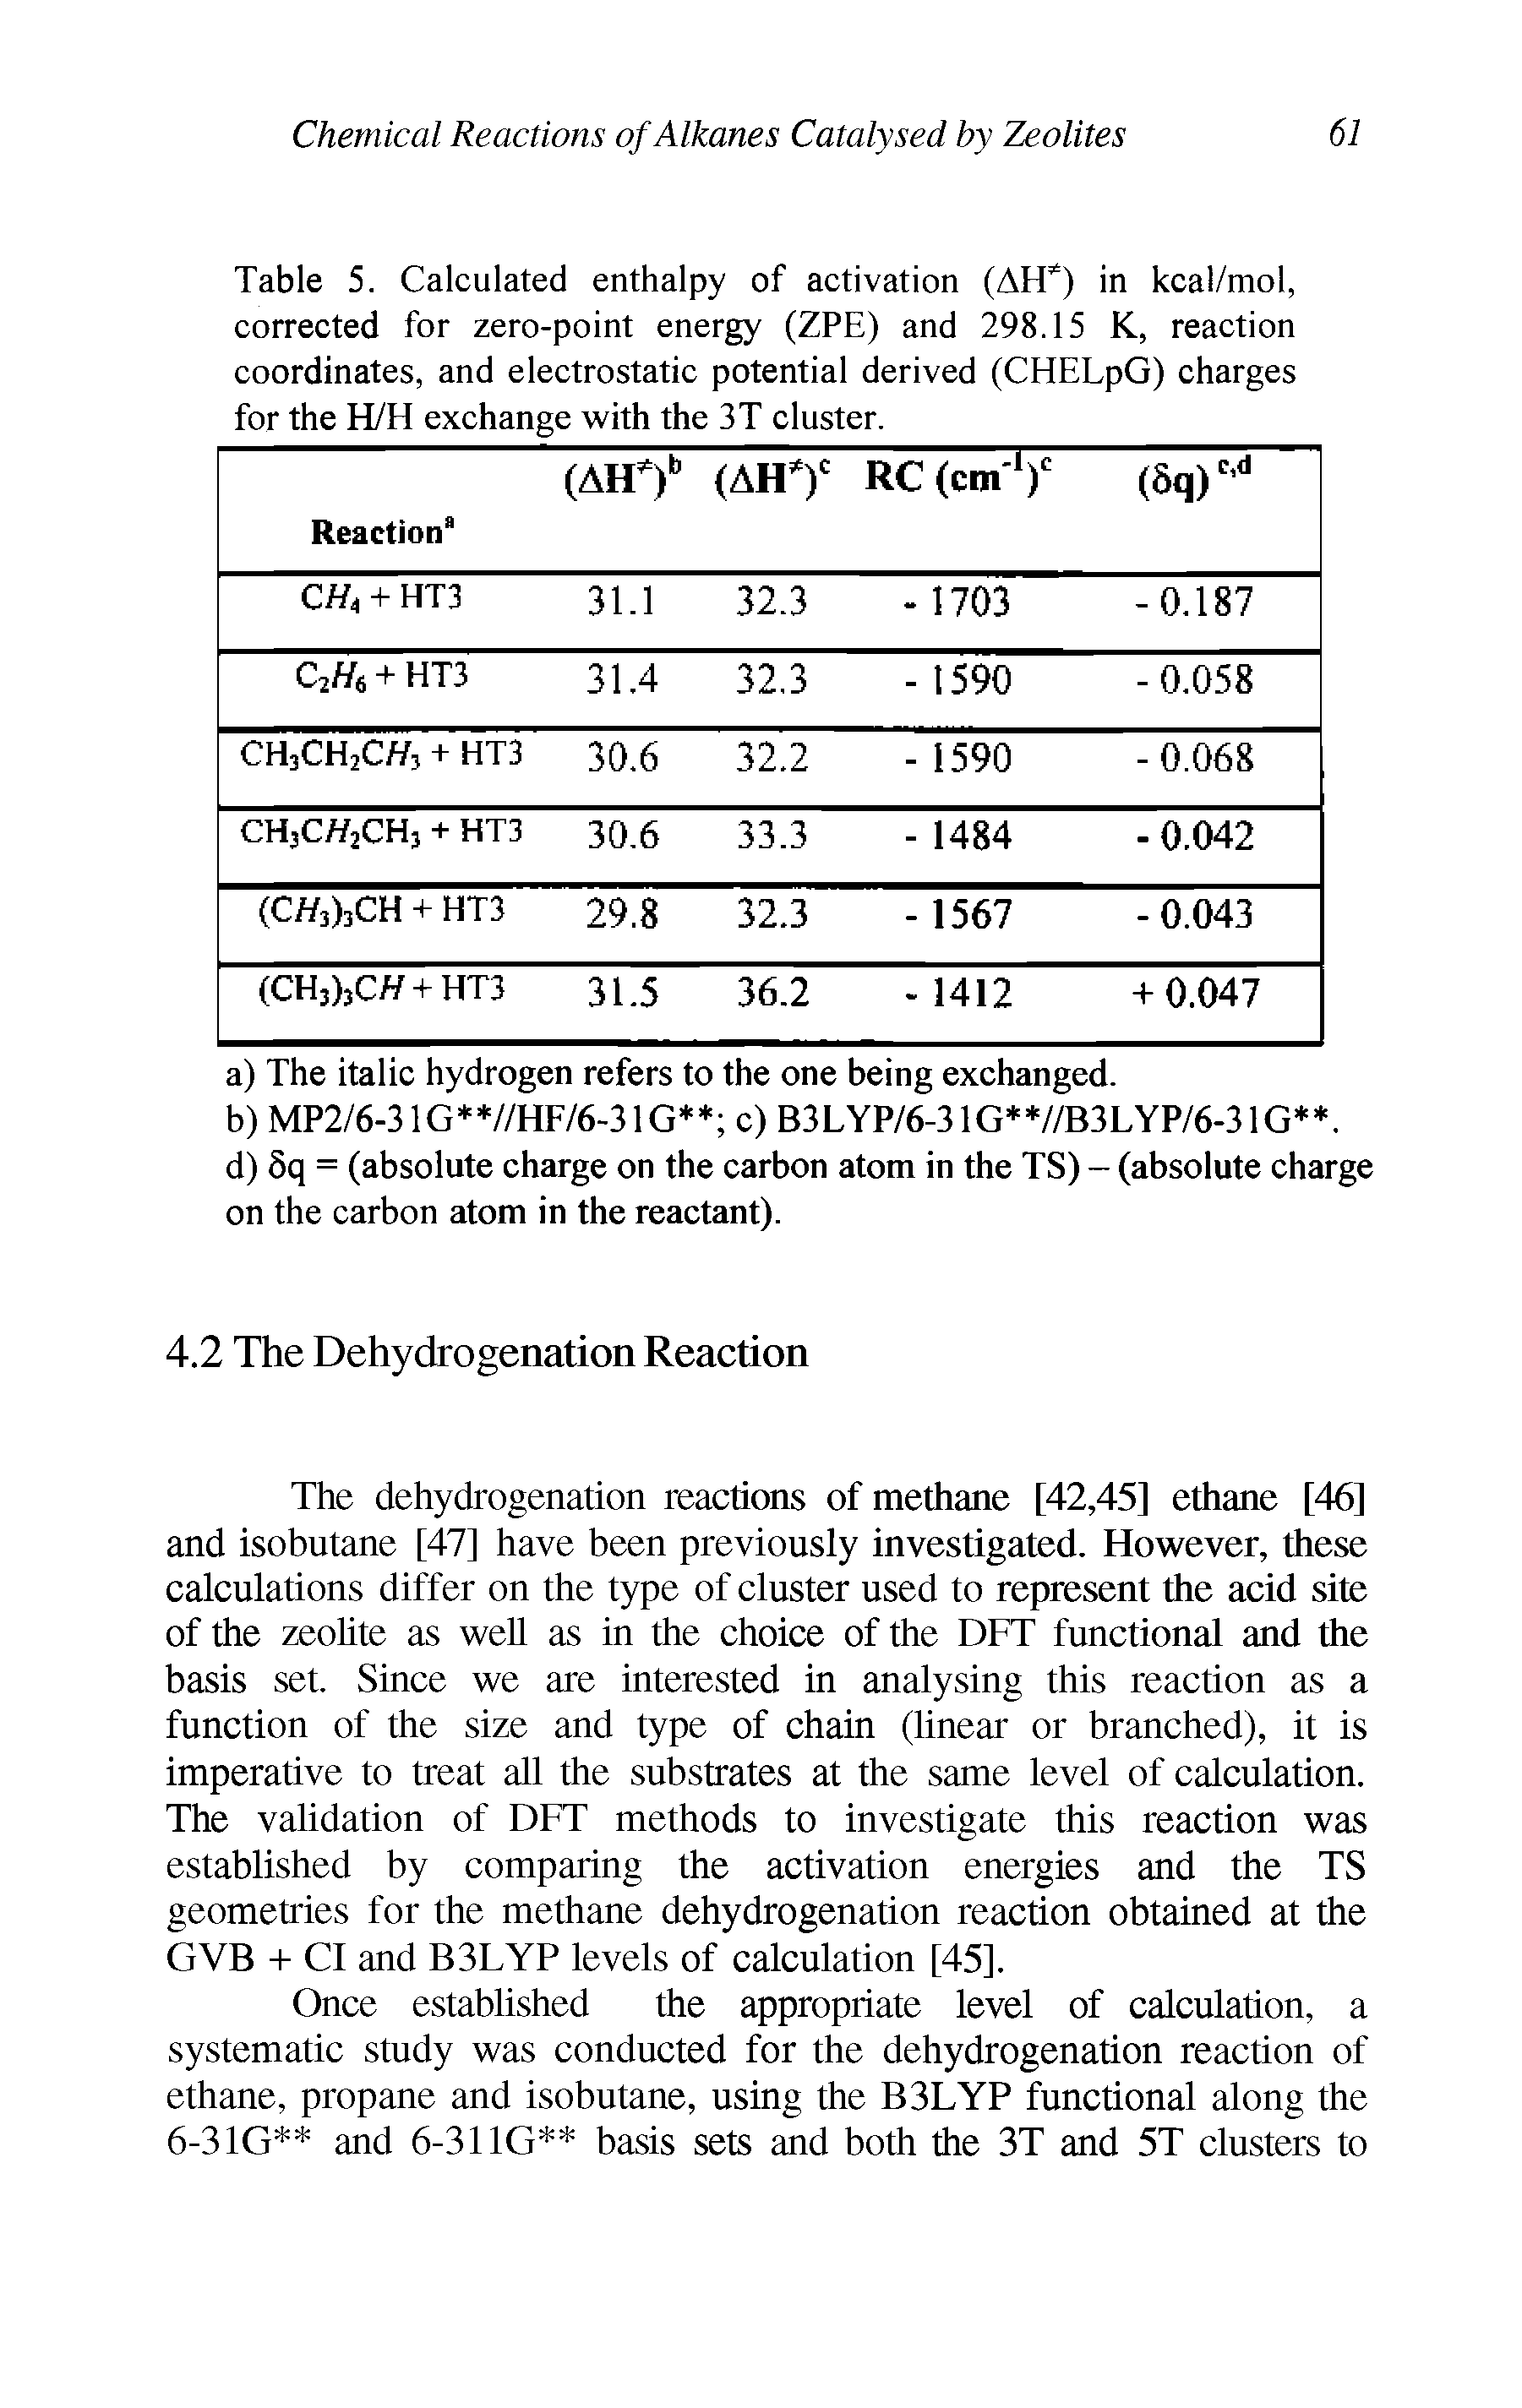 Table 5. Calculated enthalpy of activation (AH ) in kcal/mol, corrected for zero-point energy (ZPE) and 298.15 K, reaction coordinates, and electrostatic potential derived (CHELpG) charges for the H/H exchange with the 3T cluster.